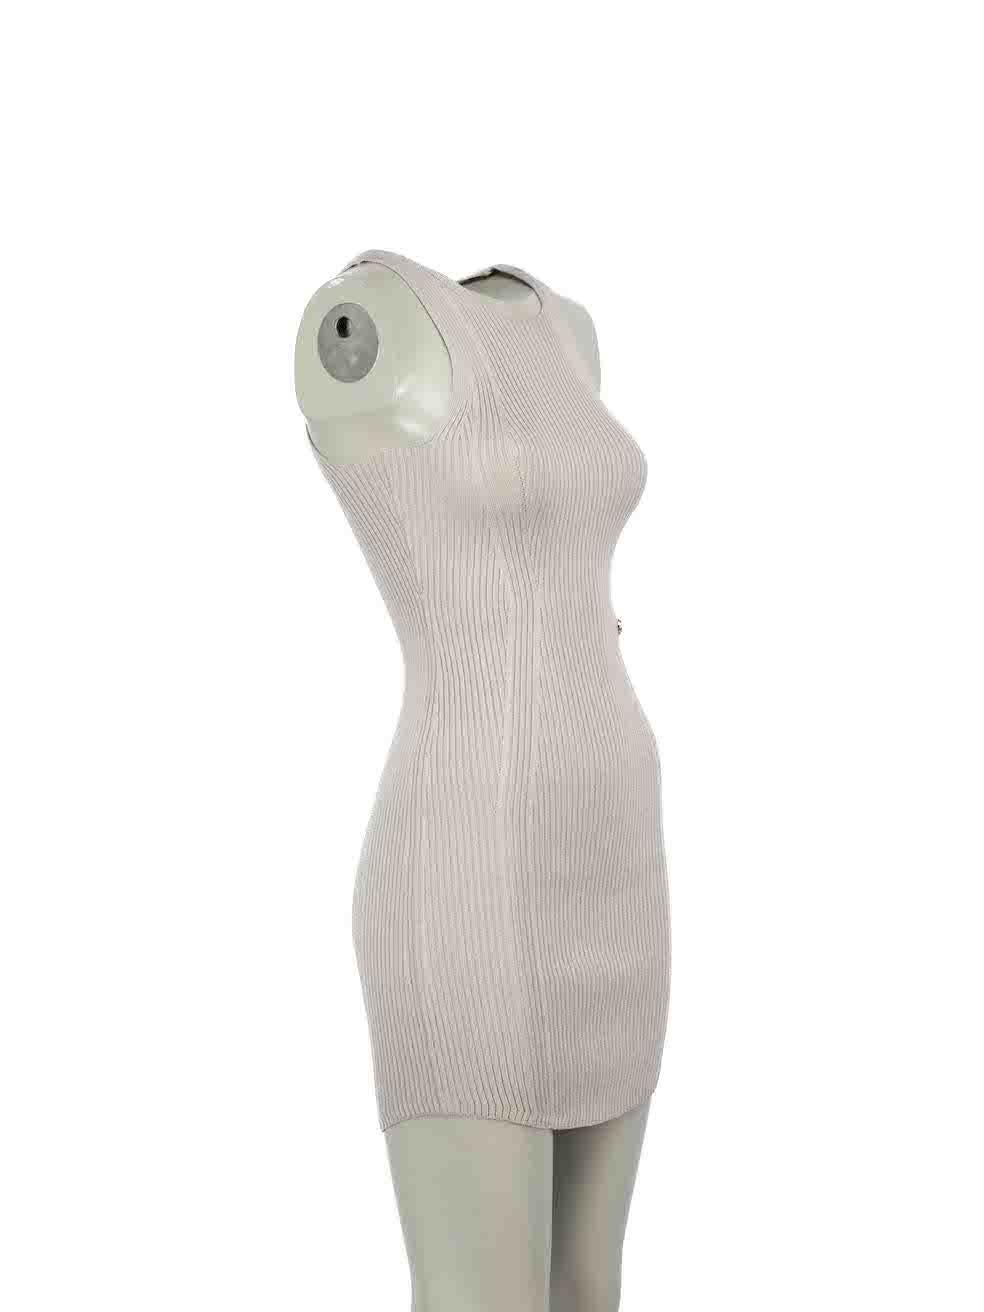 CONDITION is Very good. Minimal wear to dress is evident. Minimal wear to the texture of the dress with plucks to the knit on this used Balmain designer resale item.
 
Details
Grey
Viscose
Mini dress
Ribbed knit and stretchy
Round neckline
 
Made in